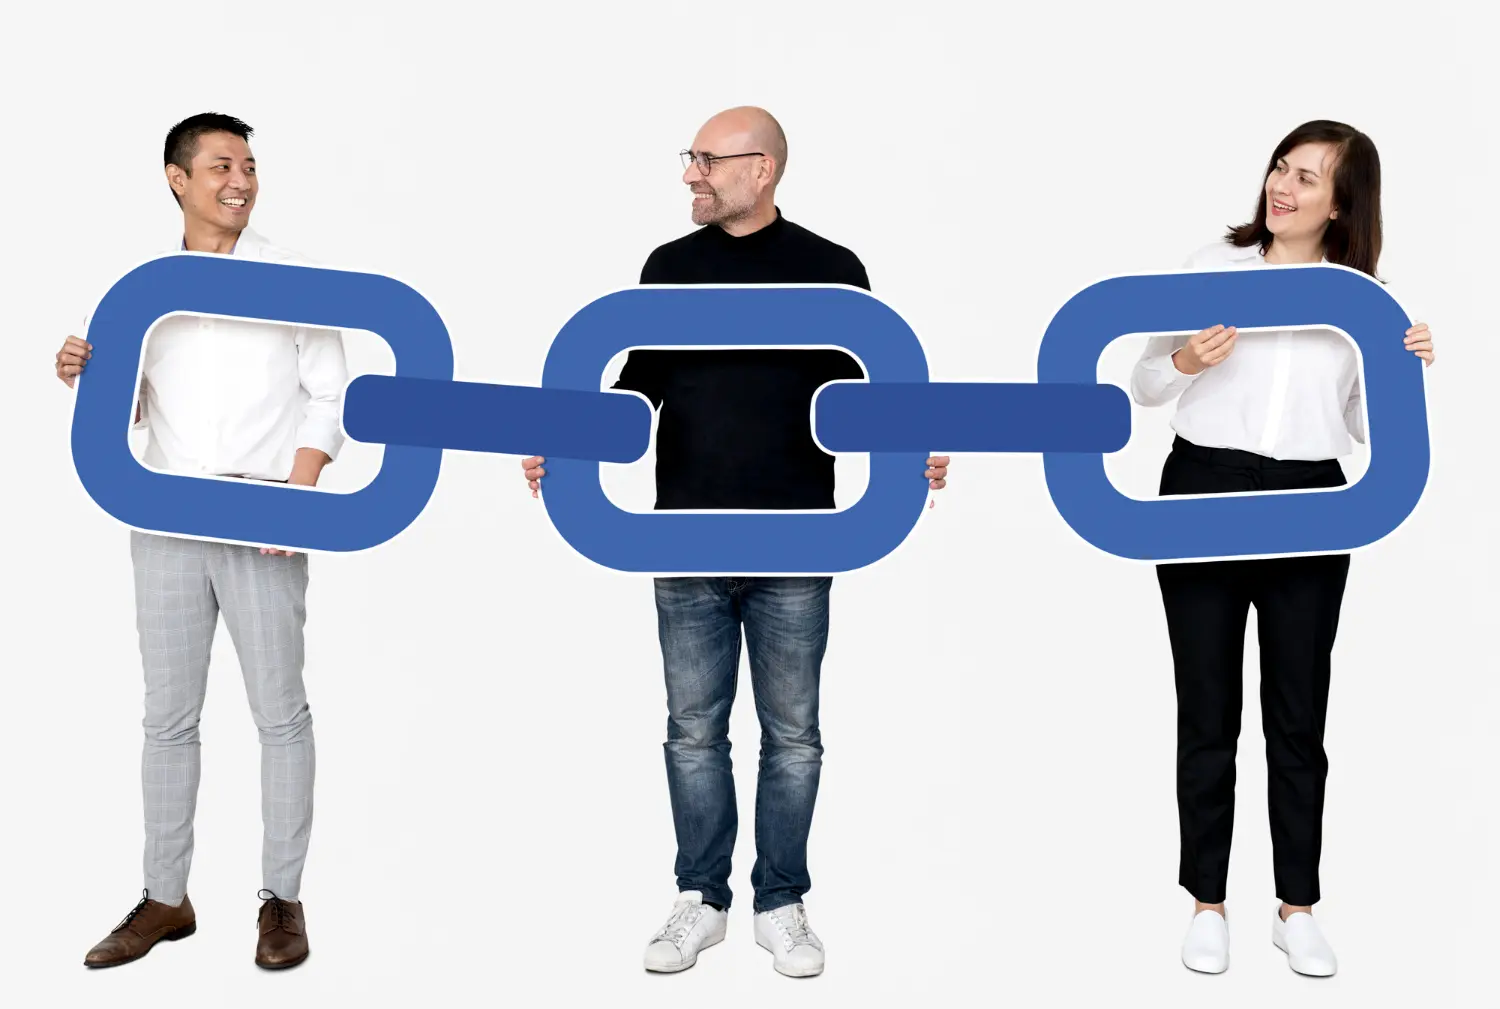 03 People with Blue Chain Showing Backlinks Concept